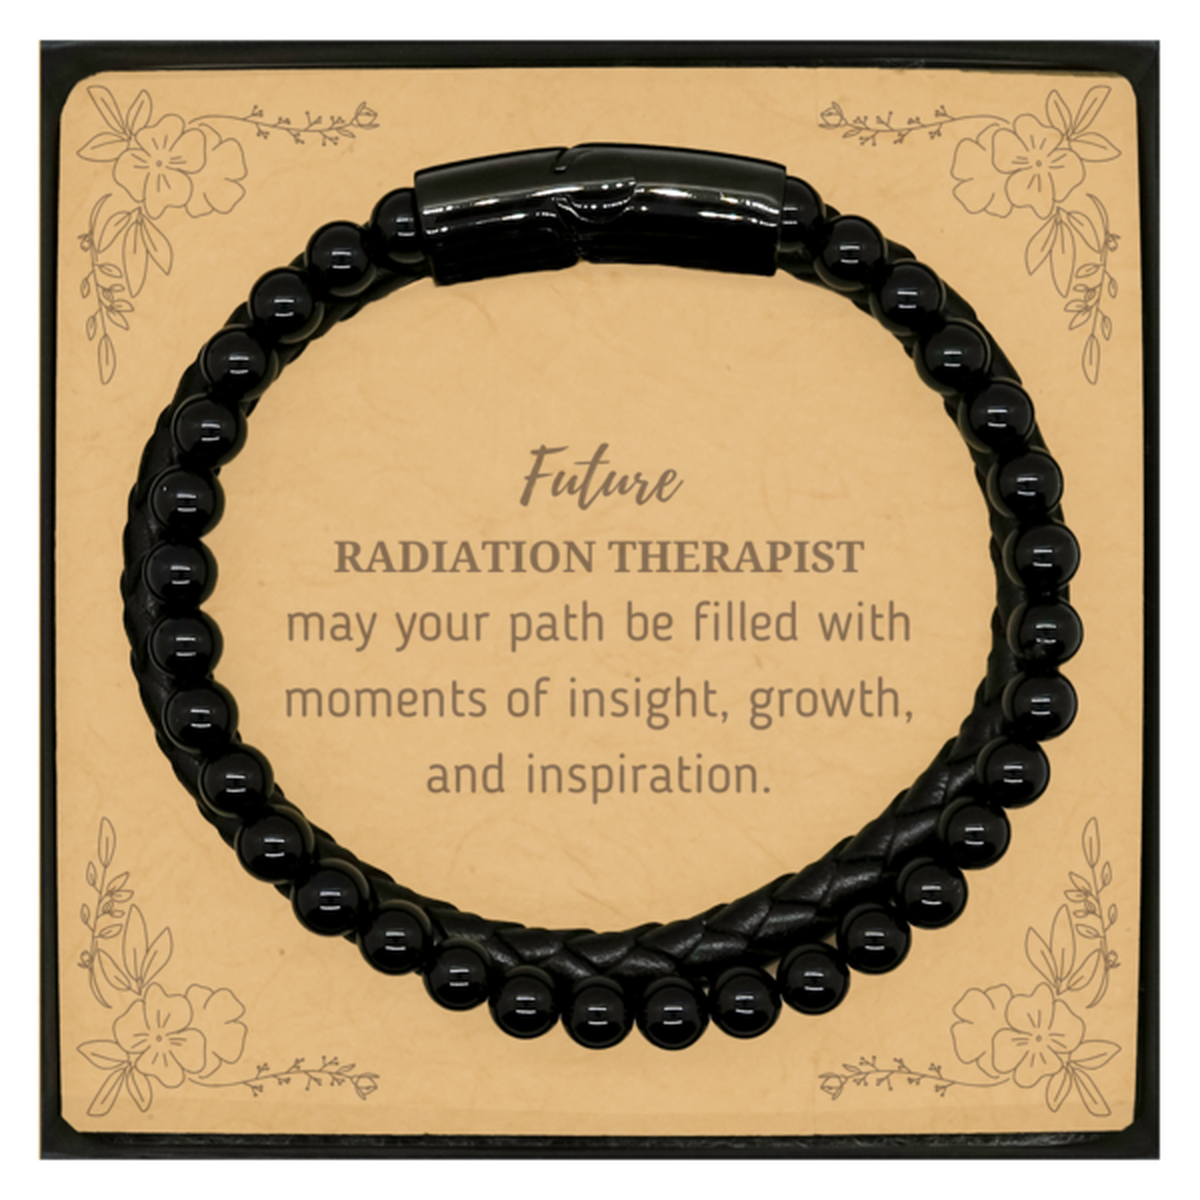 Future Radiation Therapist Gifts, May your path be filled with moments of insight, Graduation Gifts for New Radiation Therapist, Christmas Unique Stone Leather Bracelets For Men, Women, Friends